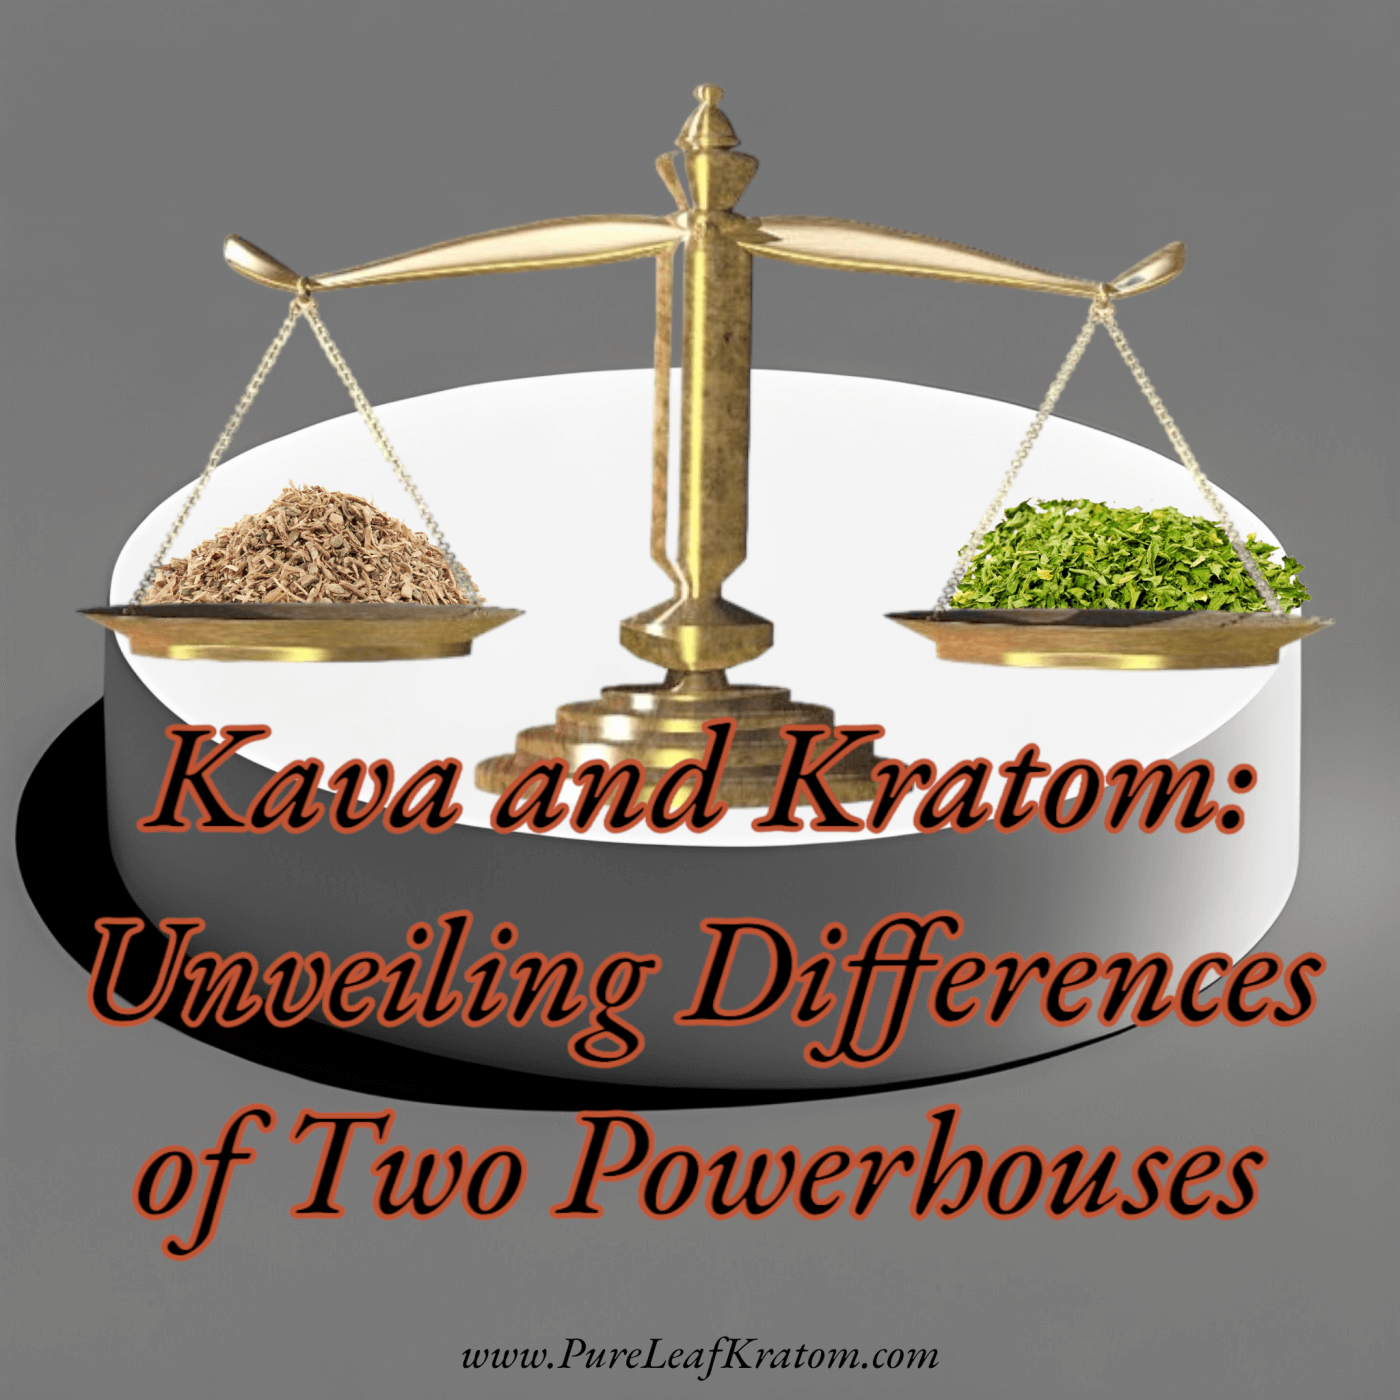 Comparing Botanical Bounties: An In-Depth Analysis of Kava and Kratom